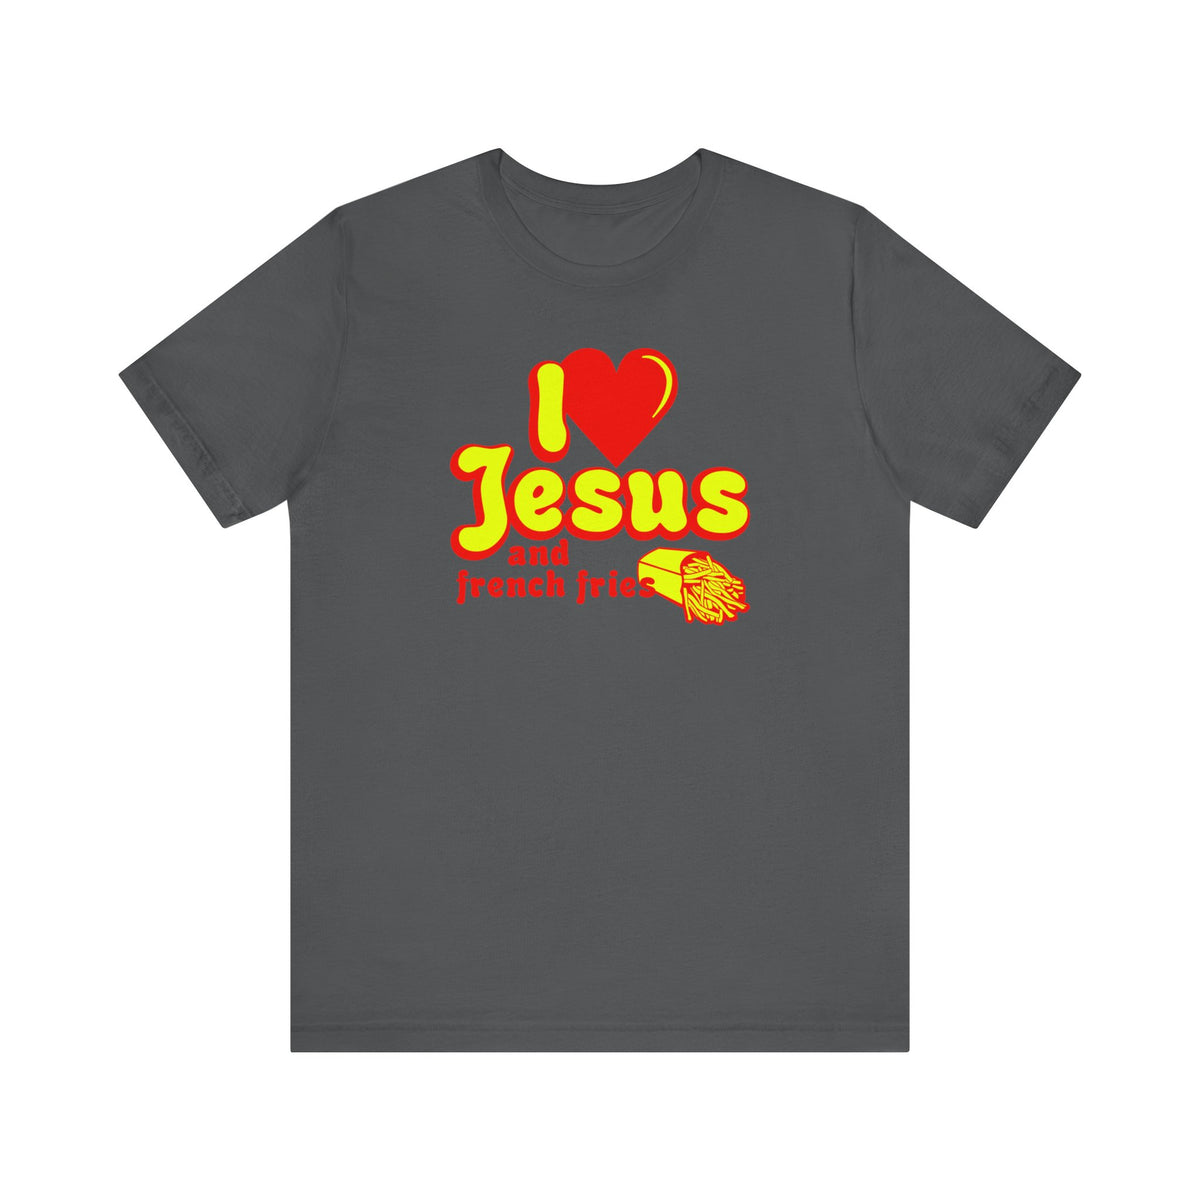 I Heart Jesus (And French Fries) - Men's T-Shirt